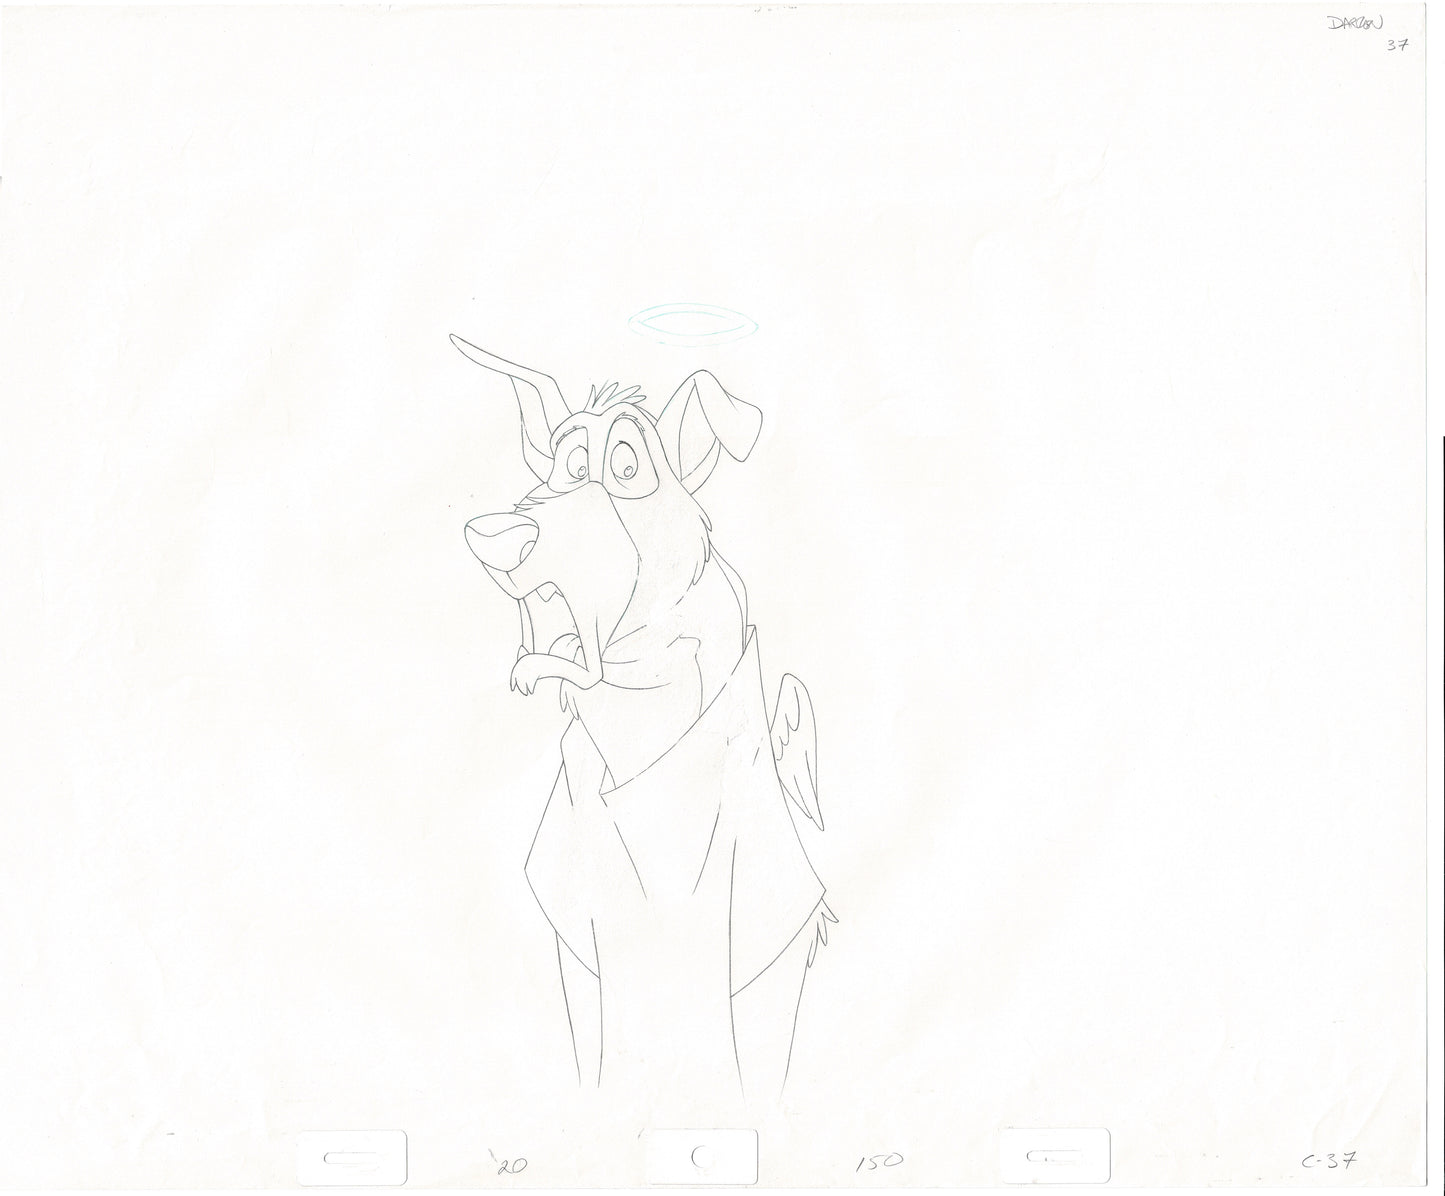 All Dogs Go To Heaven Don Bluth Charlie Production Animation Cel and Drawing 1989